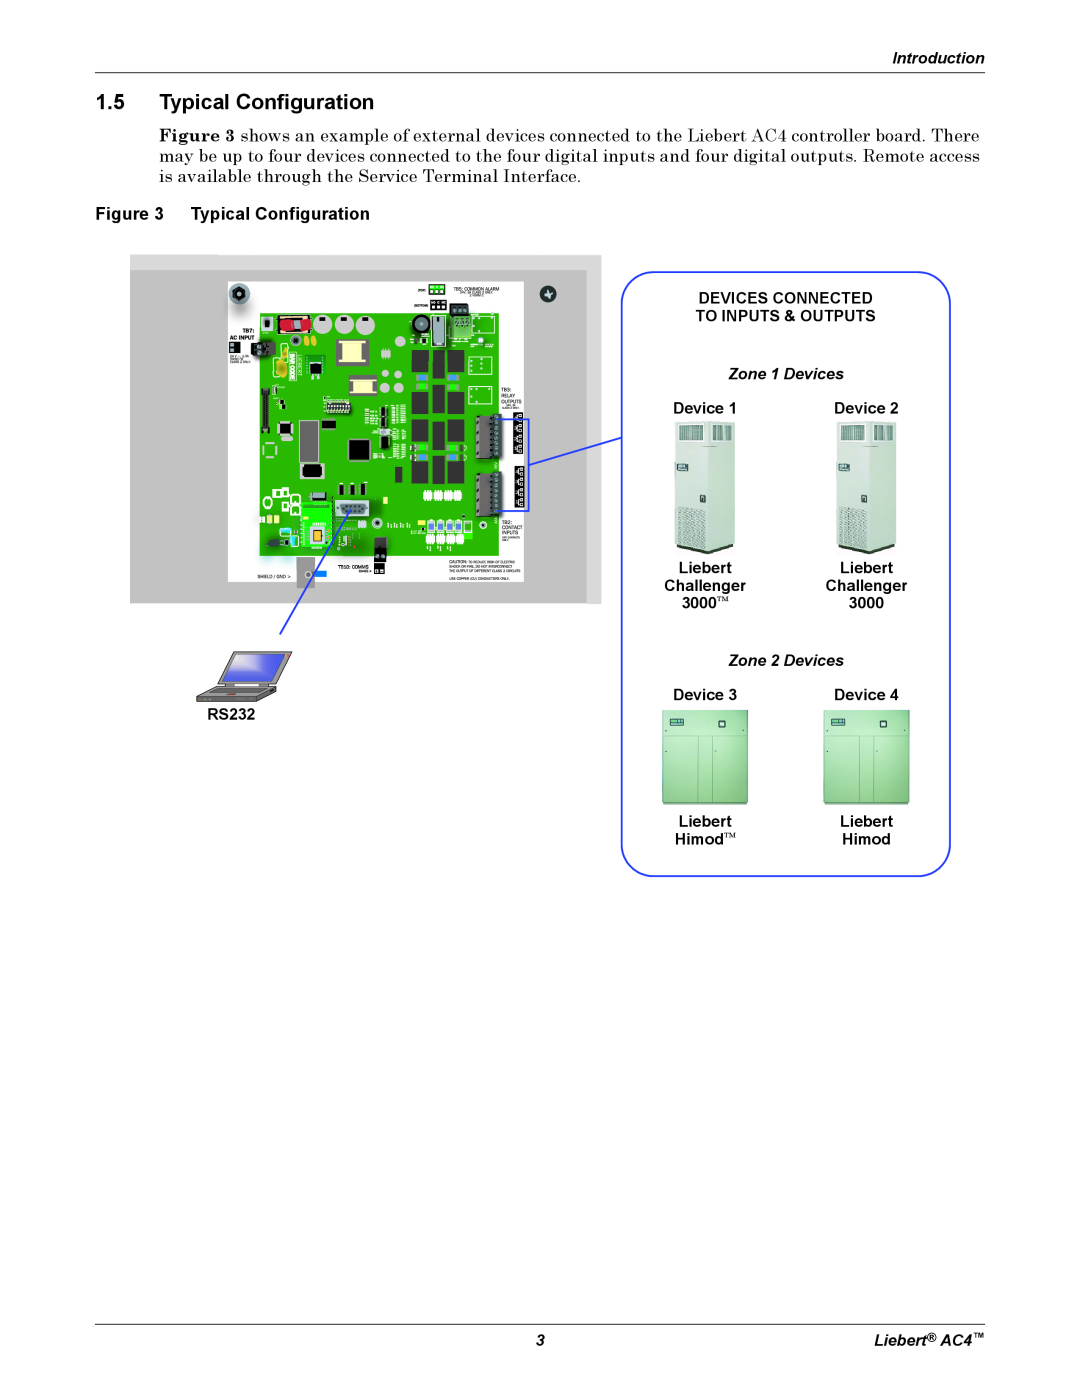 Emerson AC4 user manual 1.5Typical Configuration 